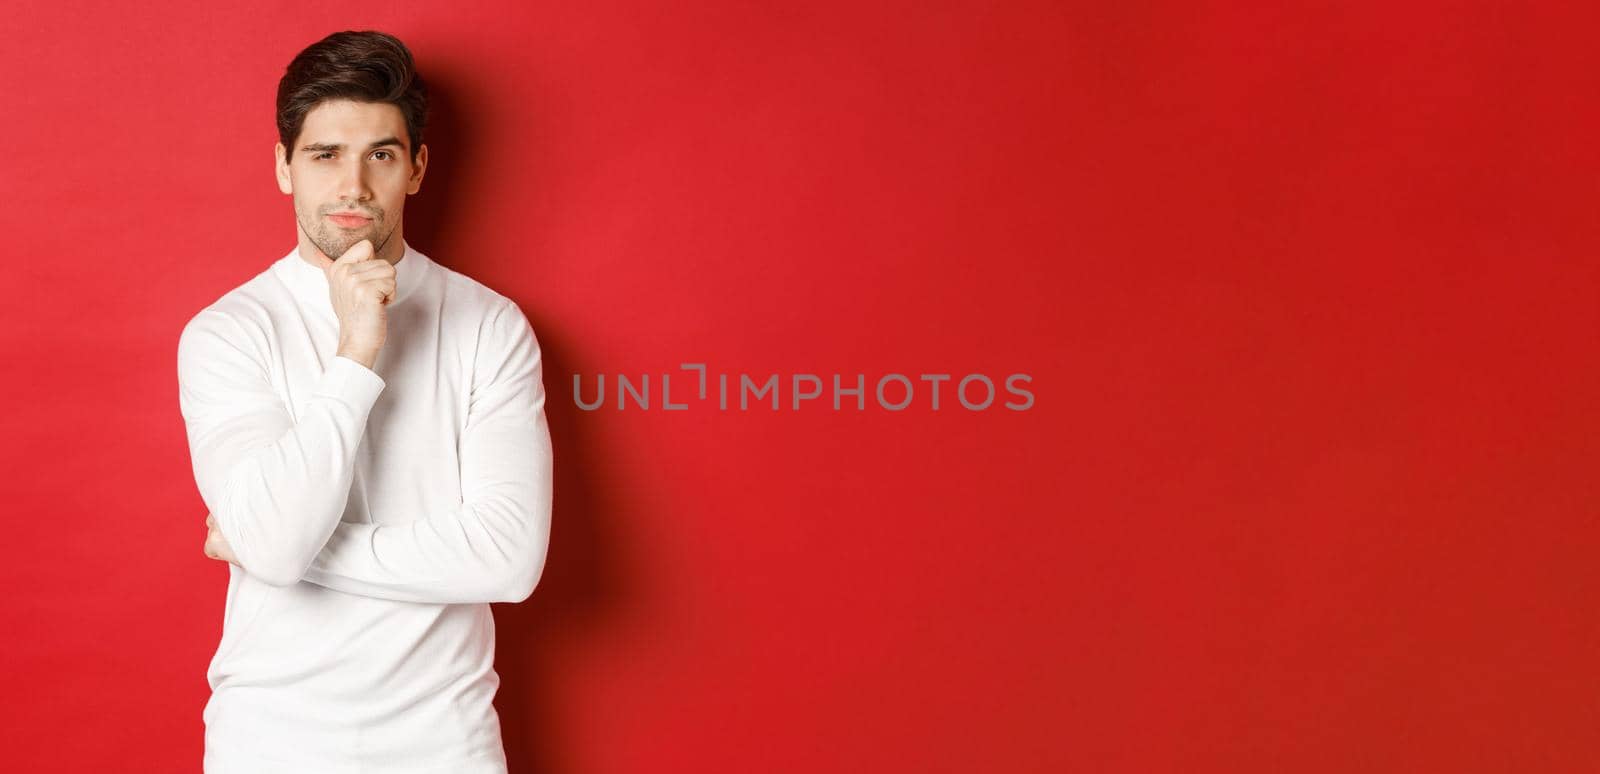 Image of thoughtful handsome man making assumption, thinking and looking at camera, standing in white sweater against red background.